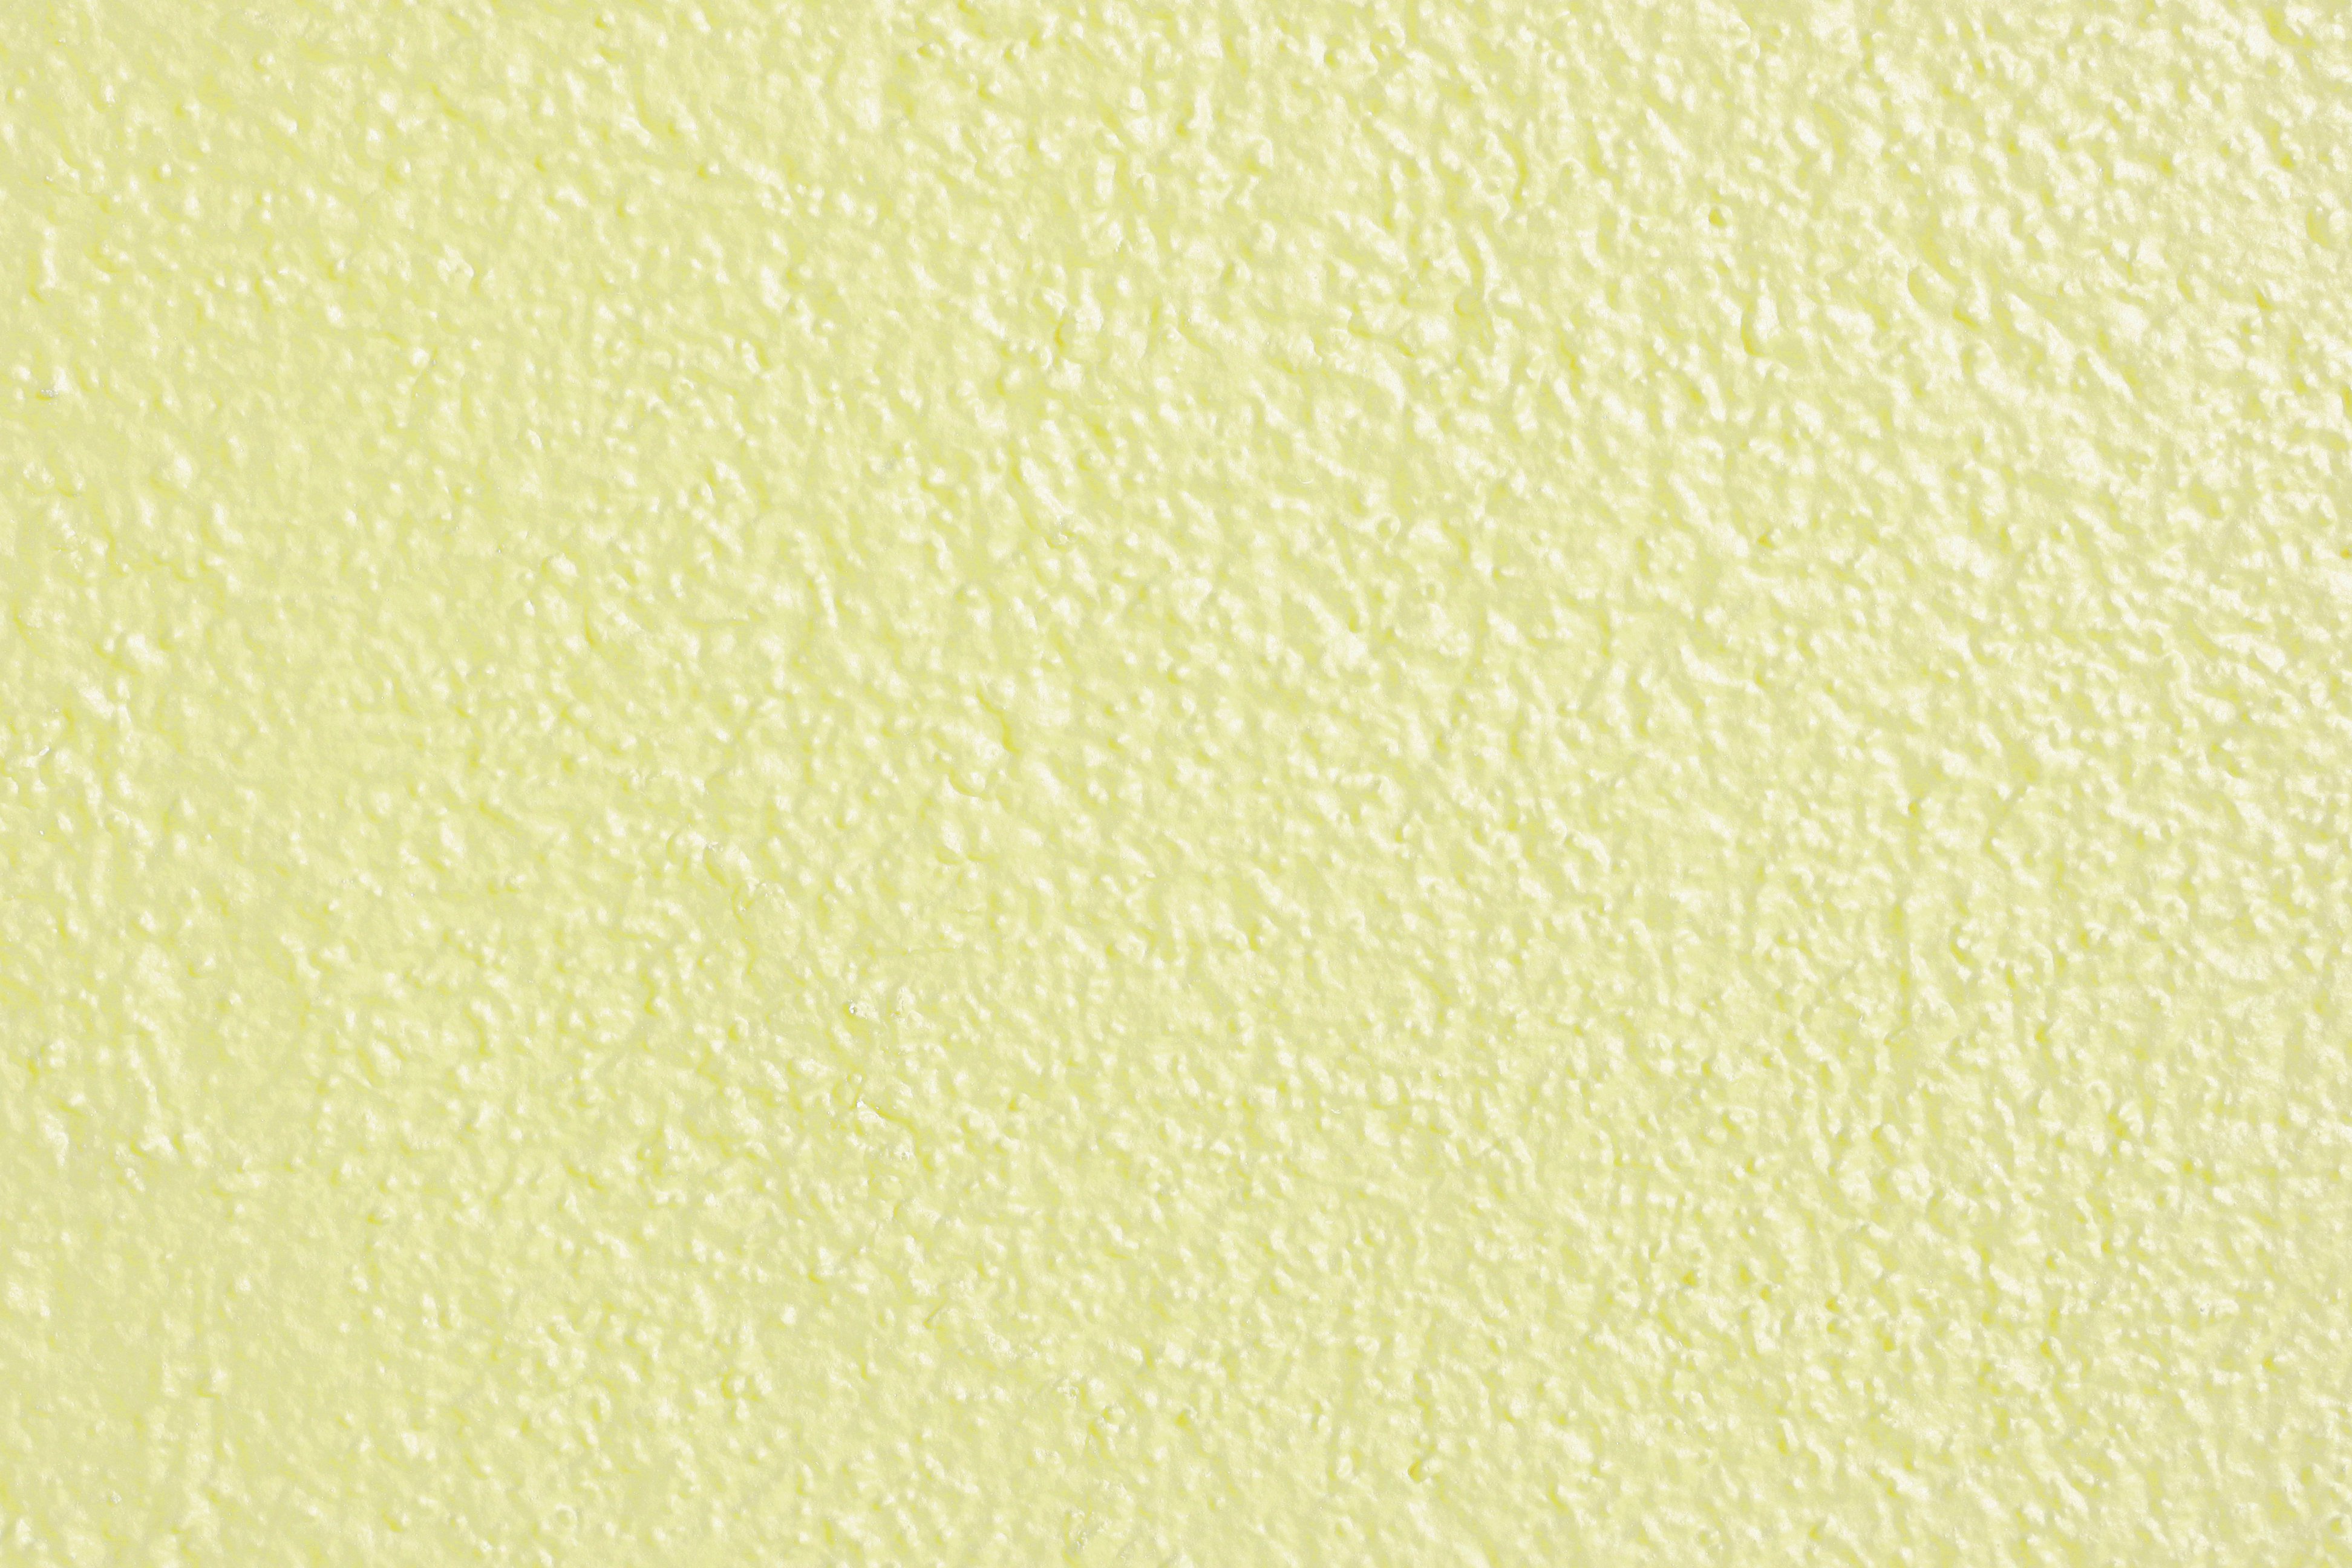 Pale Yellow Painted Wall Texture Picture Photograph Photos